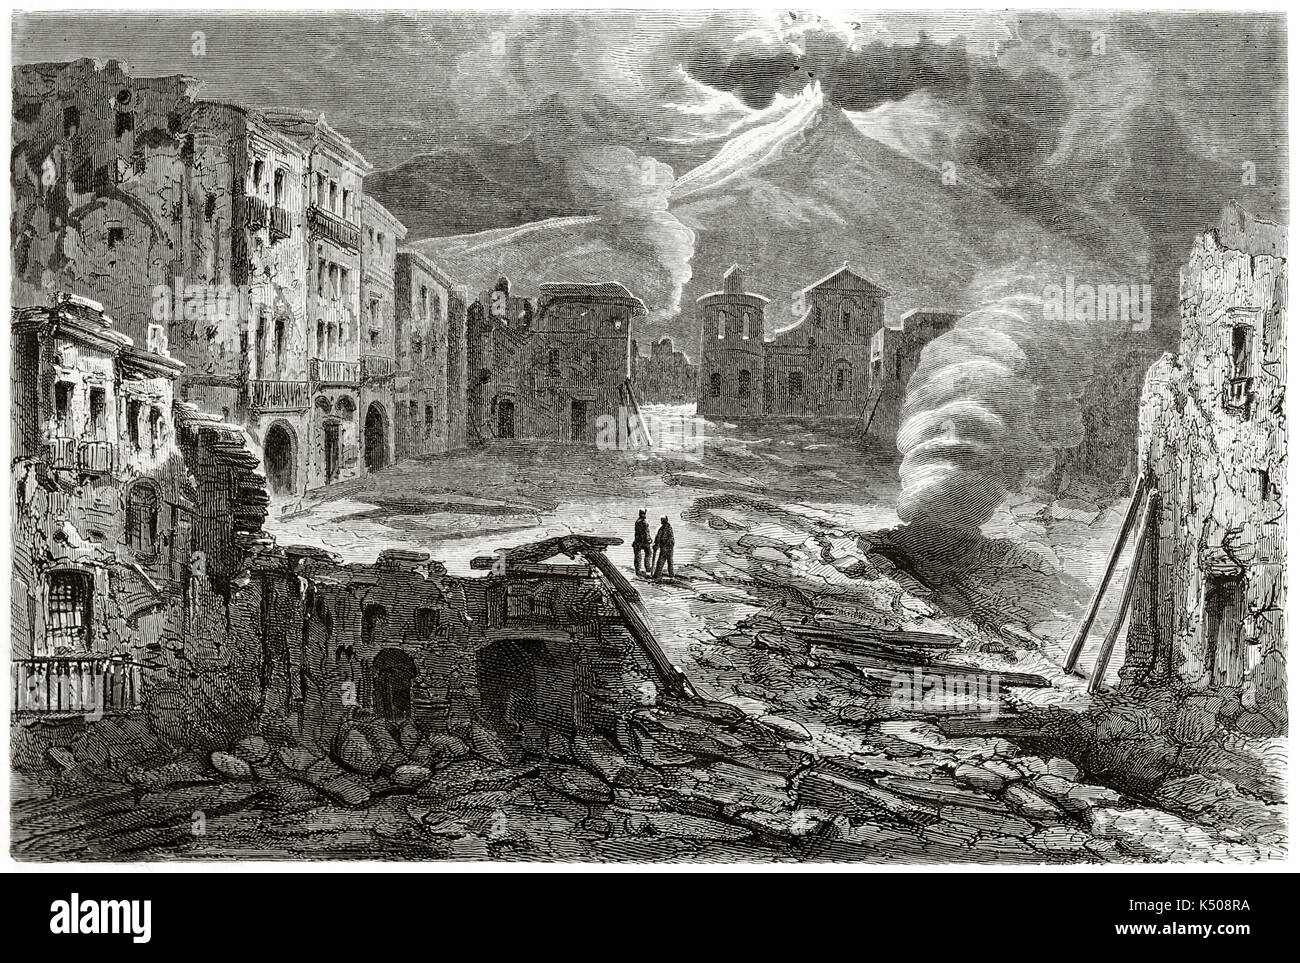 Ruined and desolated scenario in Torre del Greco main square while Vesuvius erupting in 1861 Italy. Created by Riou after photo by unknown author published on Le Tour du Monde Paris 1862 Stock Photo